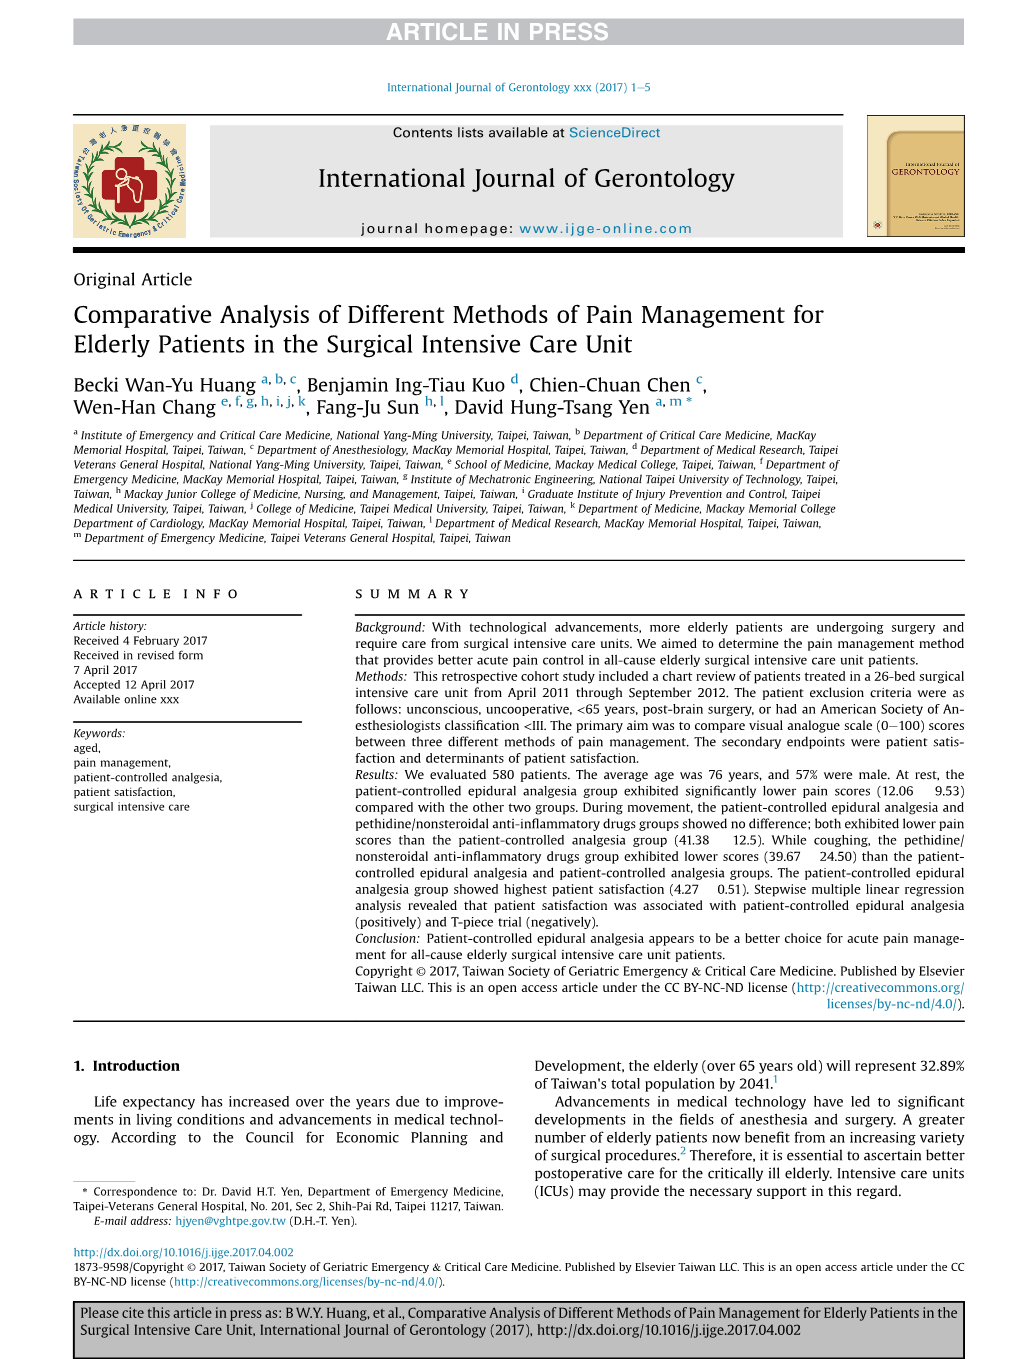 Original Articlecomparative Analysis of Different Methods of Pain Management for Elderly Patients in the Surgical Intensive Care